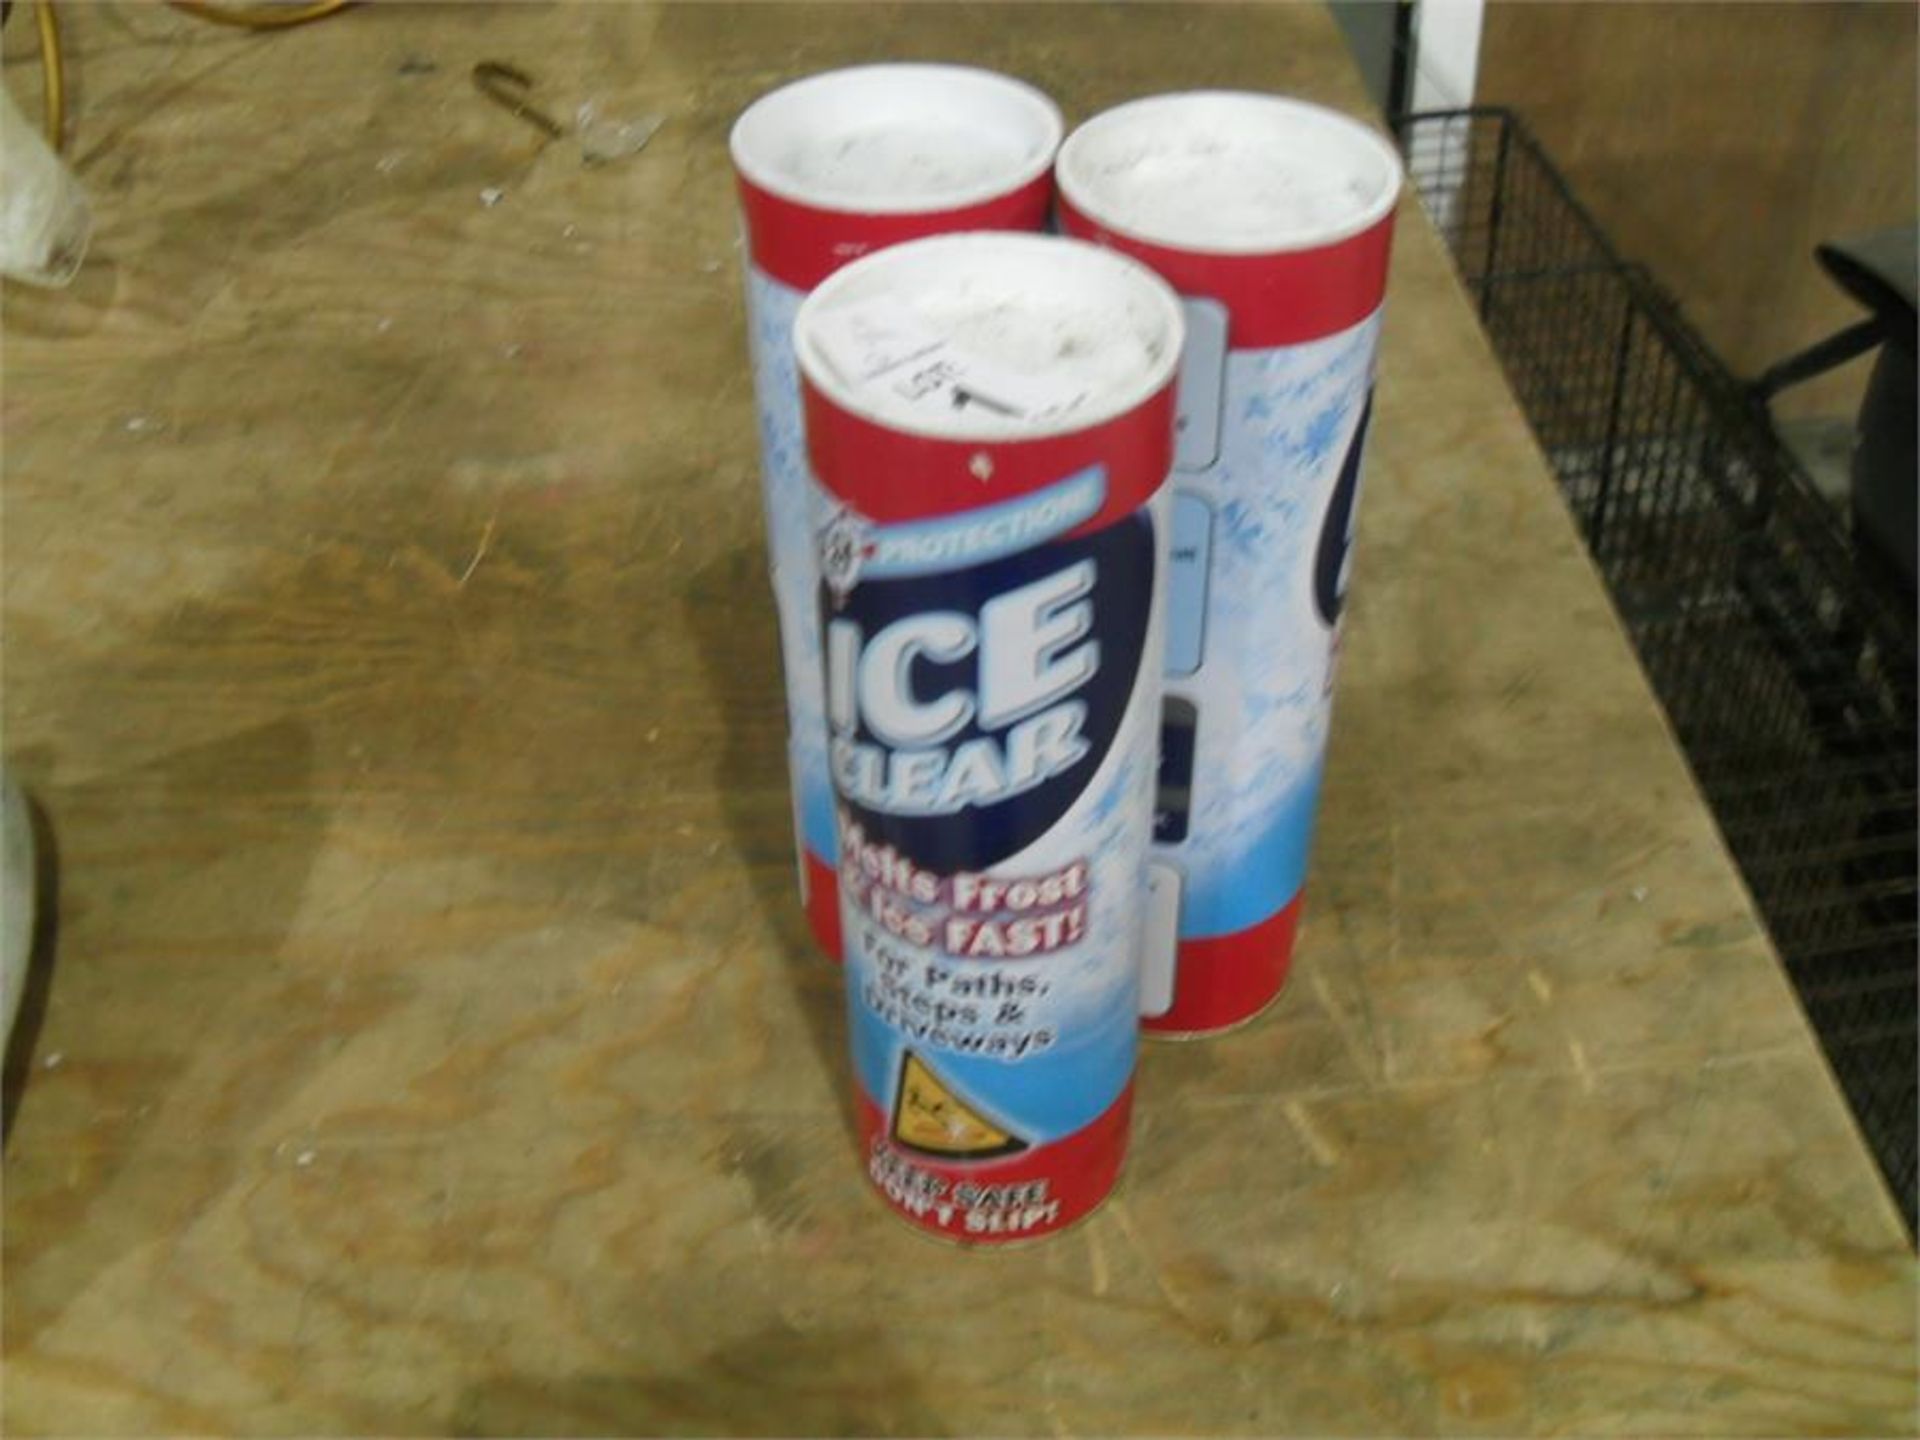 3 TUBS OF ICE REMOVER